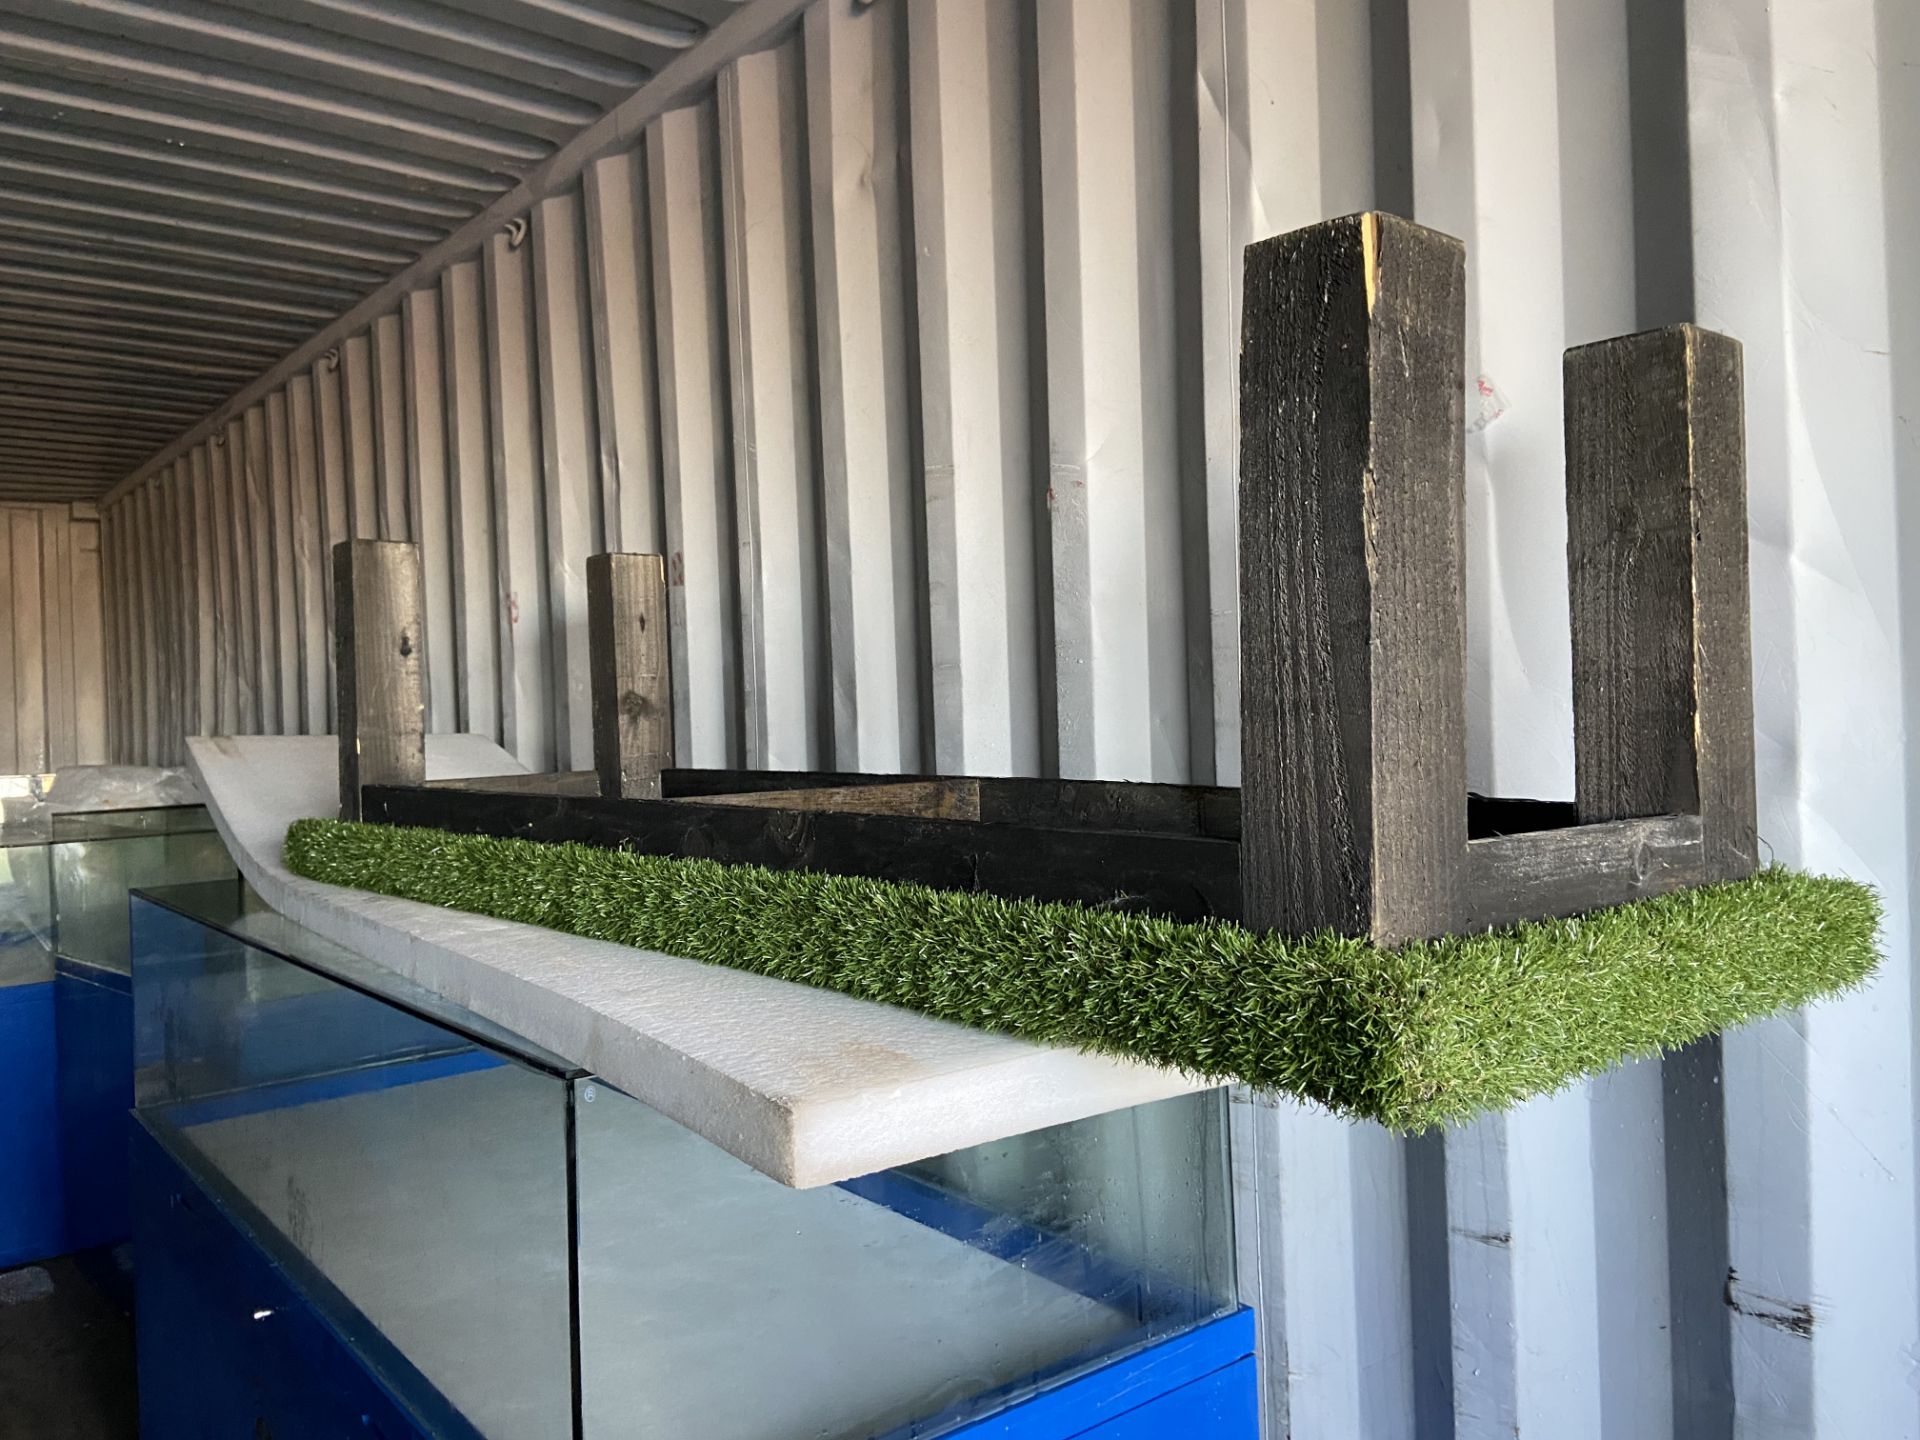 Two Artificial Grass Benches approx. 2m x 650mm x